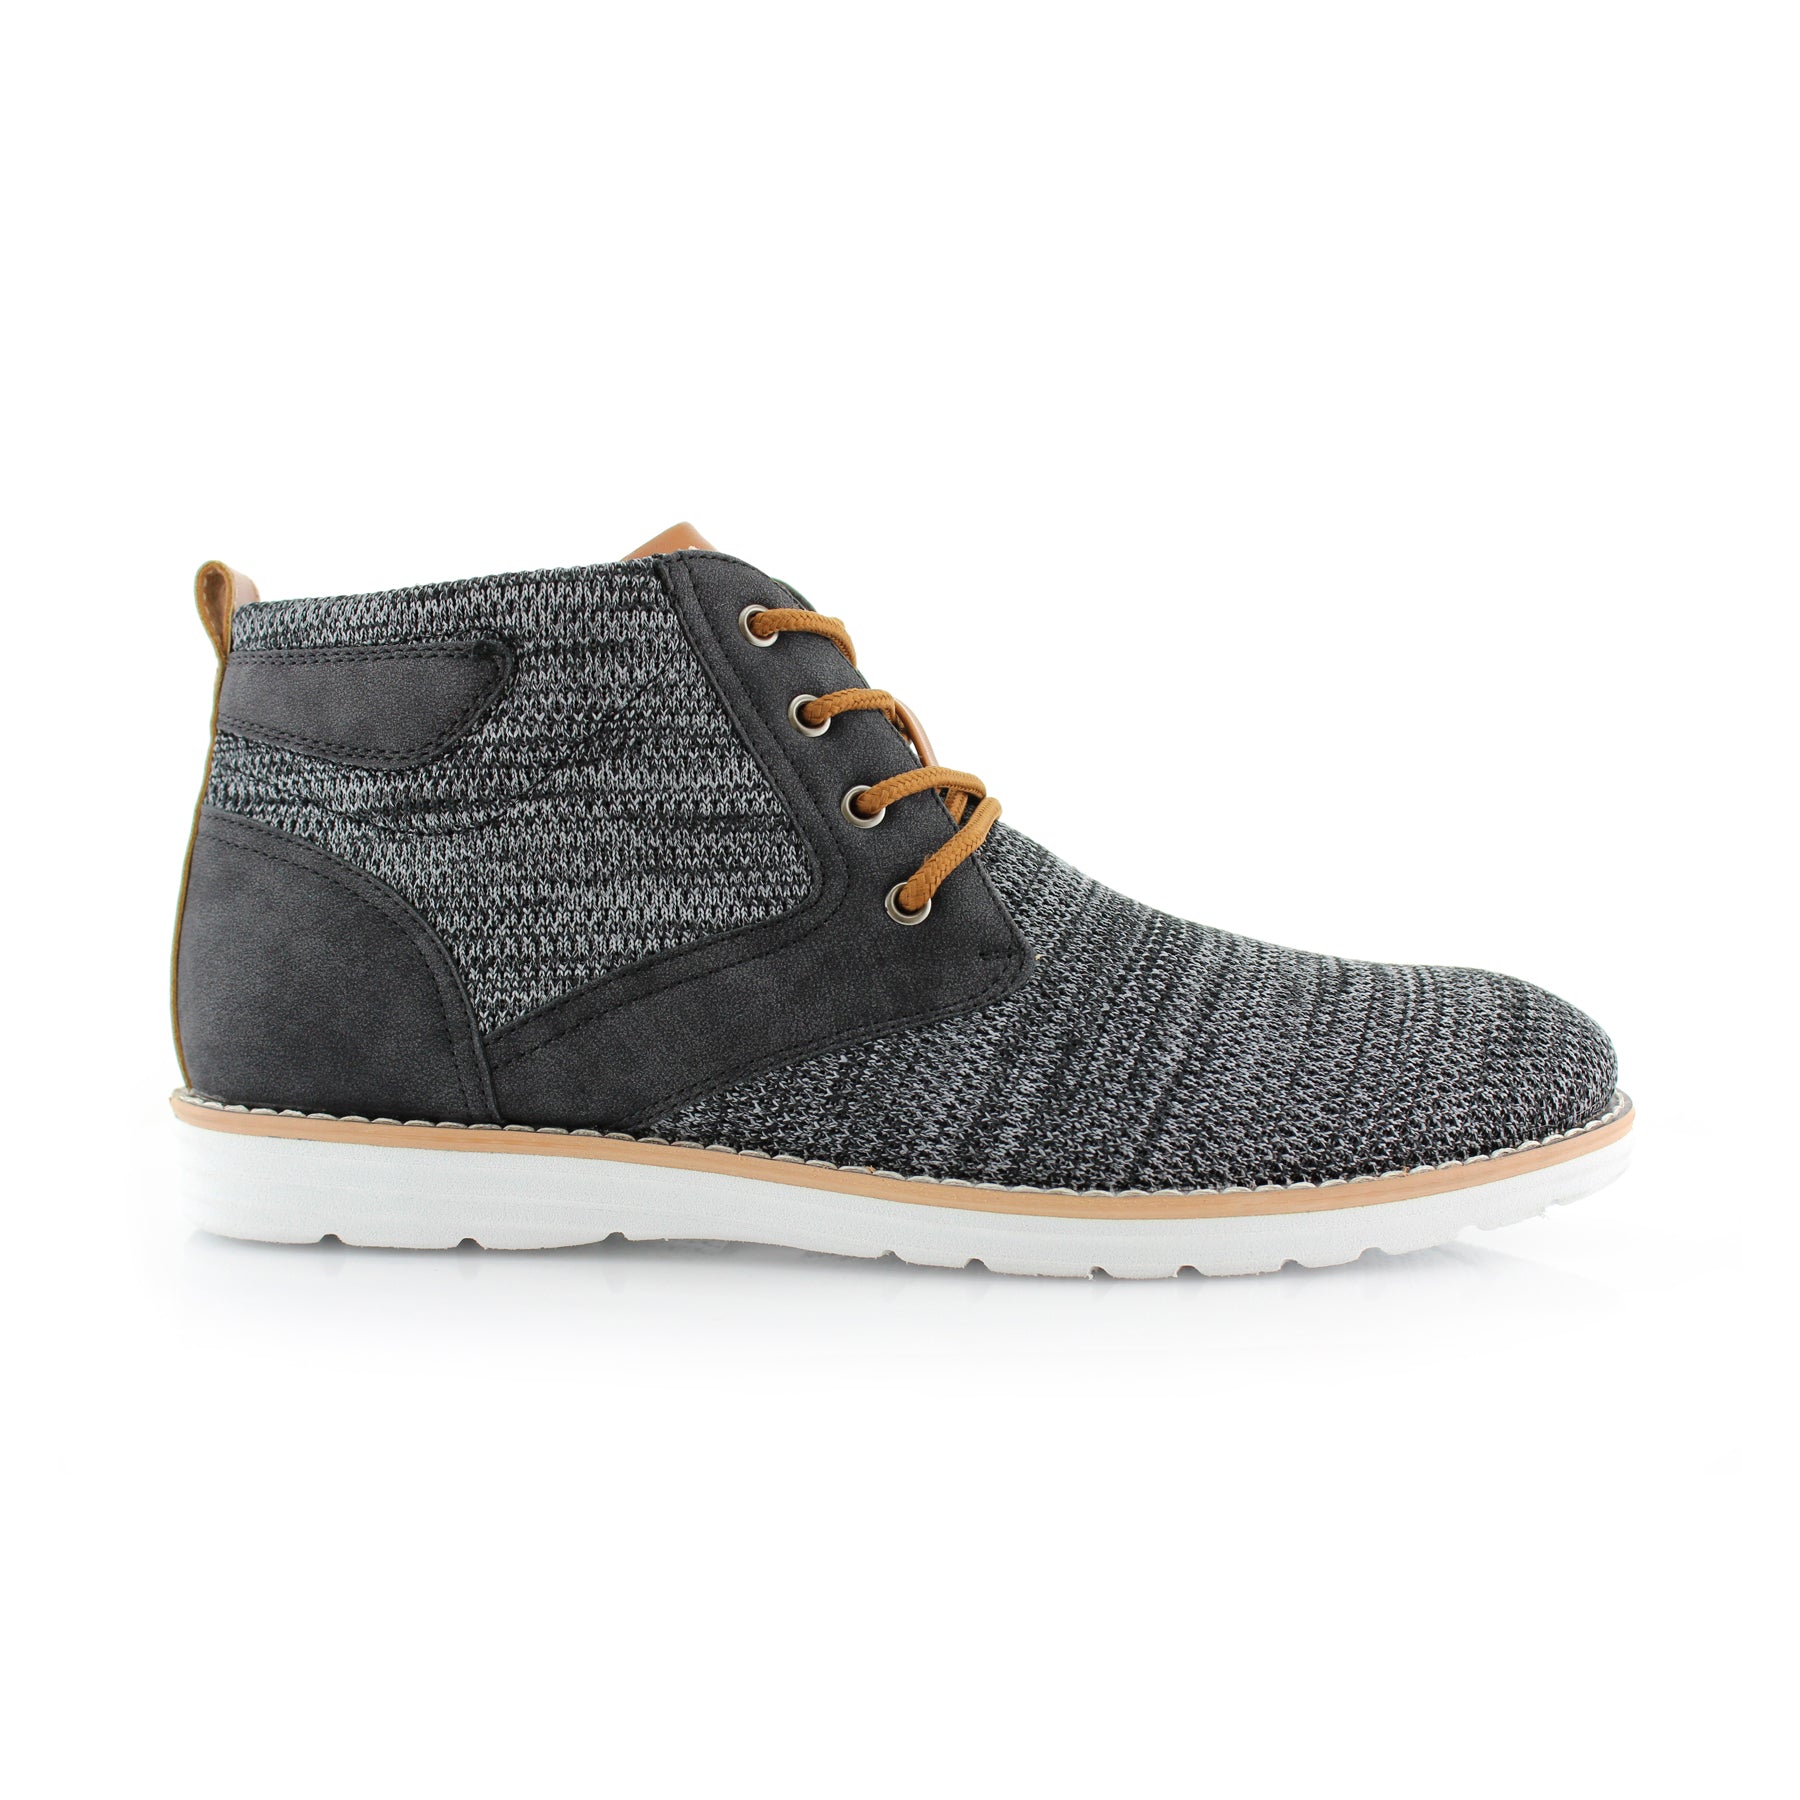 Duo-textured Sneaker Chukka Boots | Bohort by Polar Fox | Conal Footwear | Outer Side Angle View